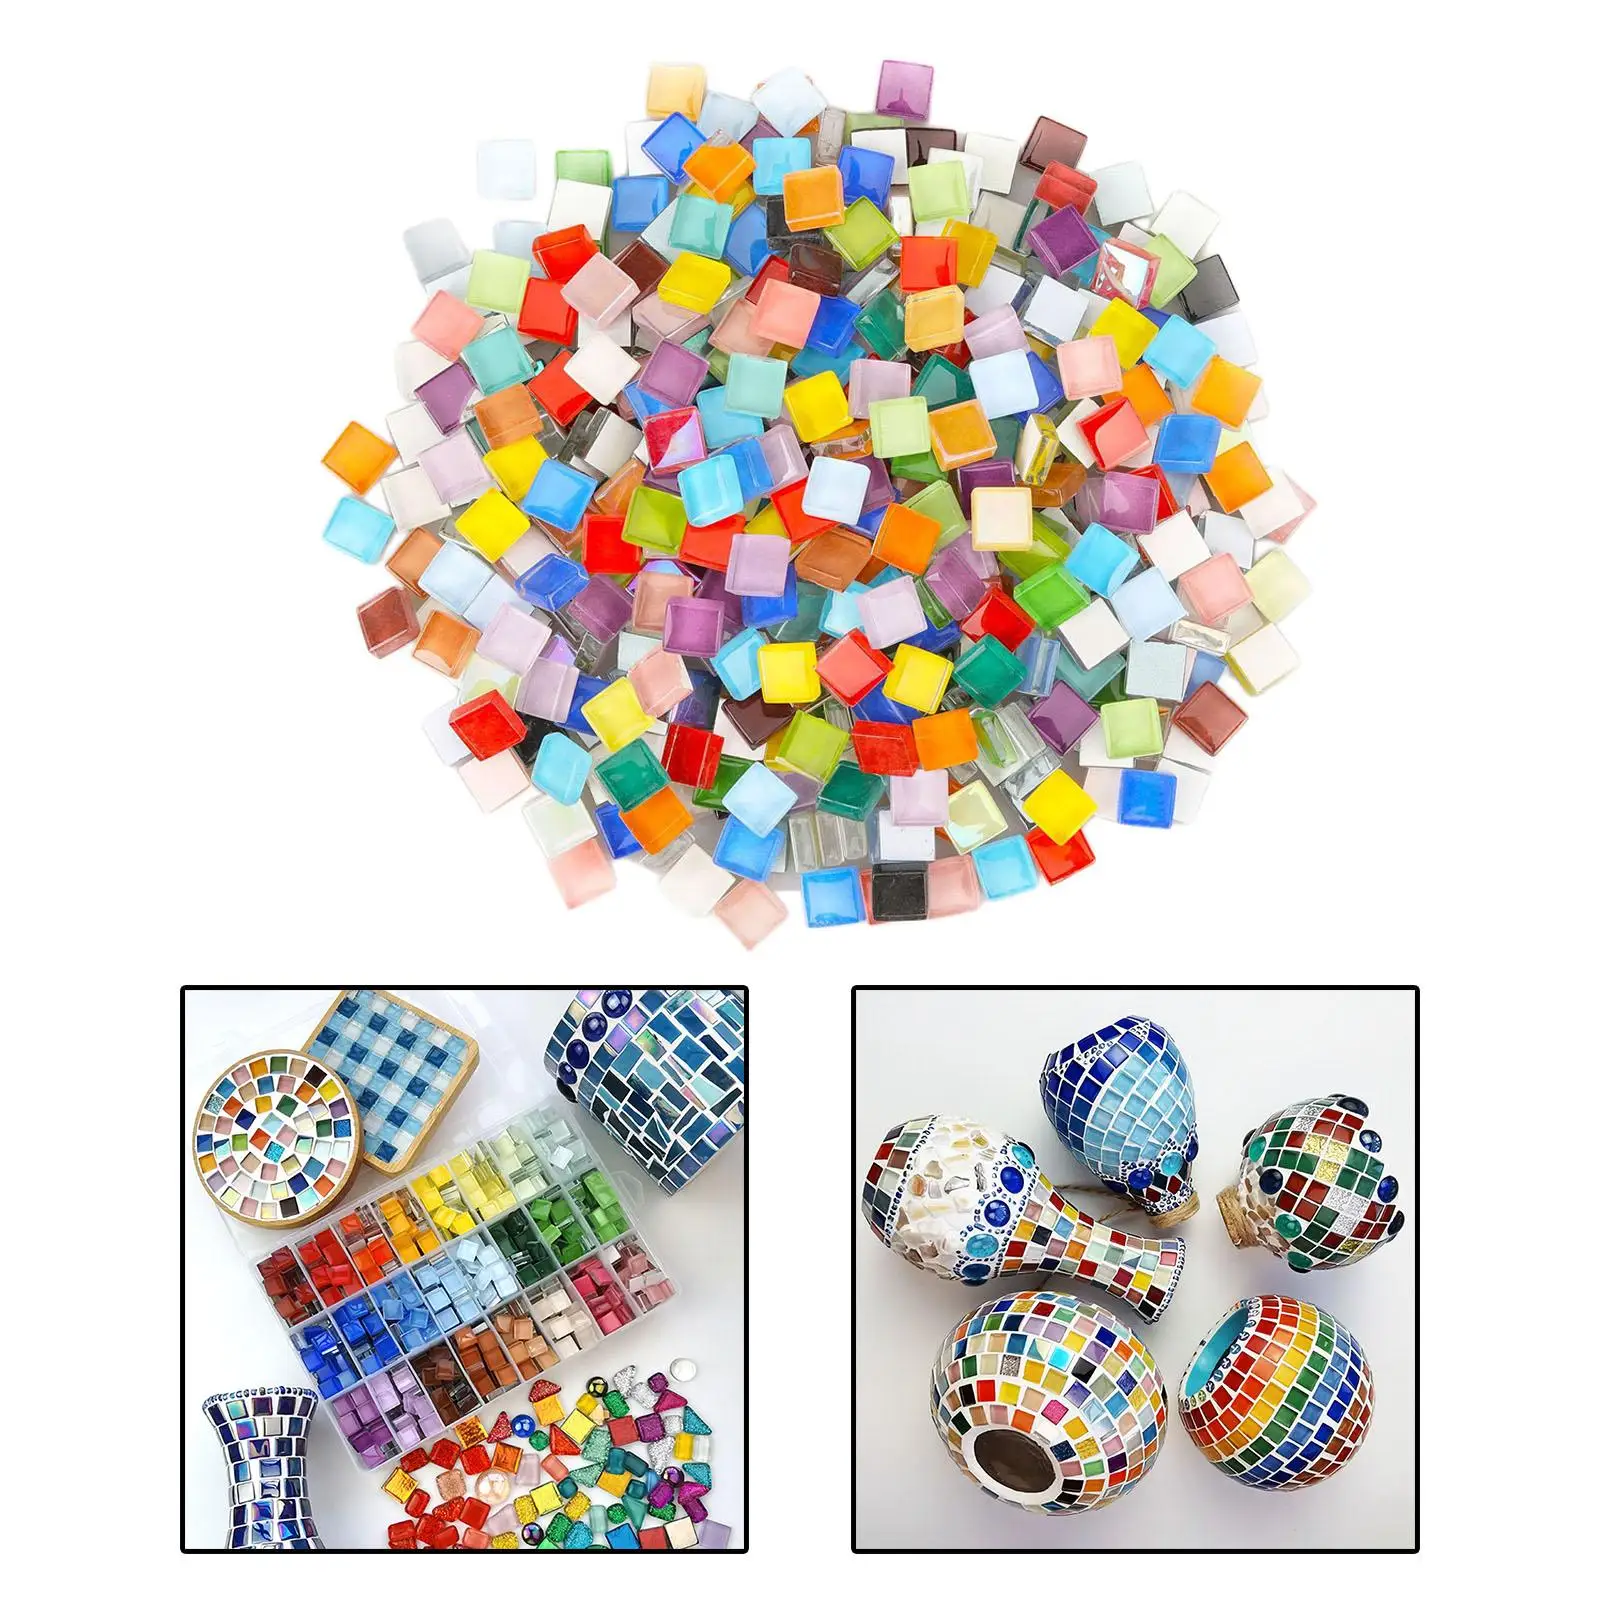 Crystal Glass Mosaic Tiles Glitter Assorted Mix 10x10x4mm Gifts DIY Material 1kg 1000G Mixed for  Home Decor  